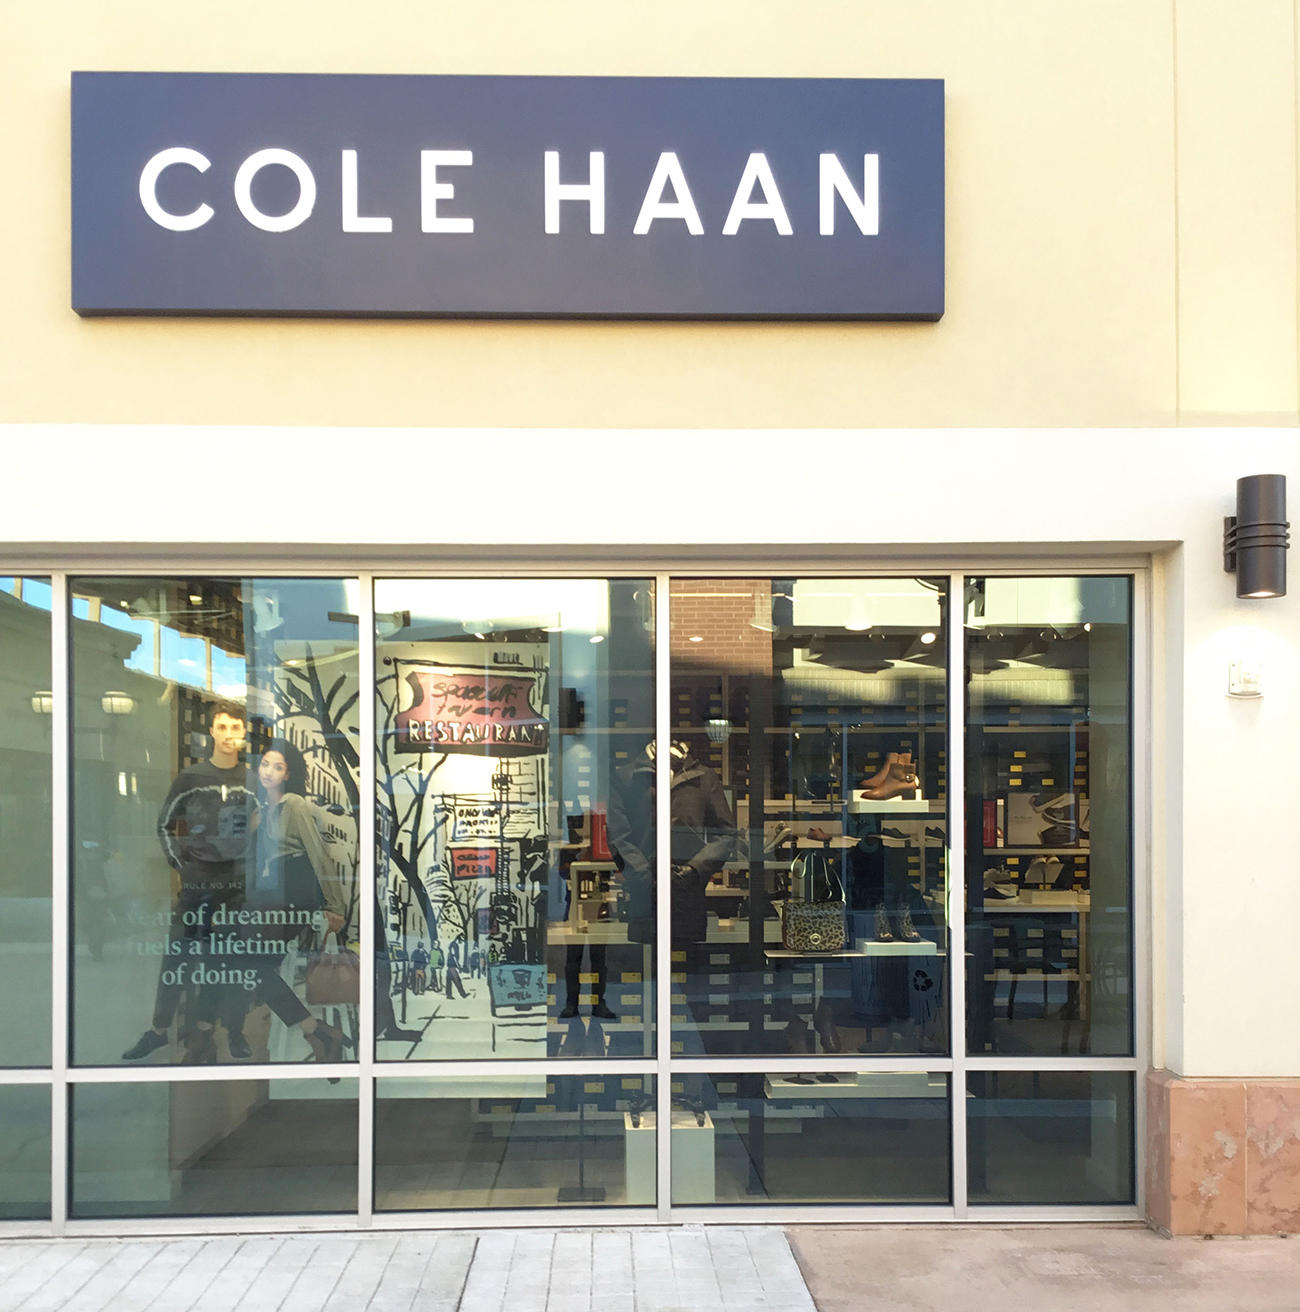 TangerOutlets opens its doors to Fort Worth shoppers; Nike, Cole Haan, H&M  among the 70 stores